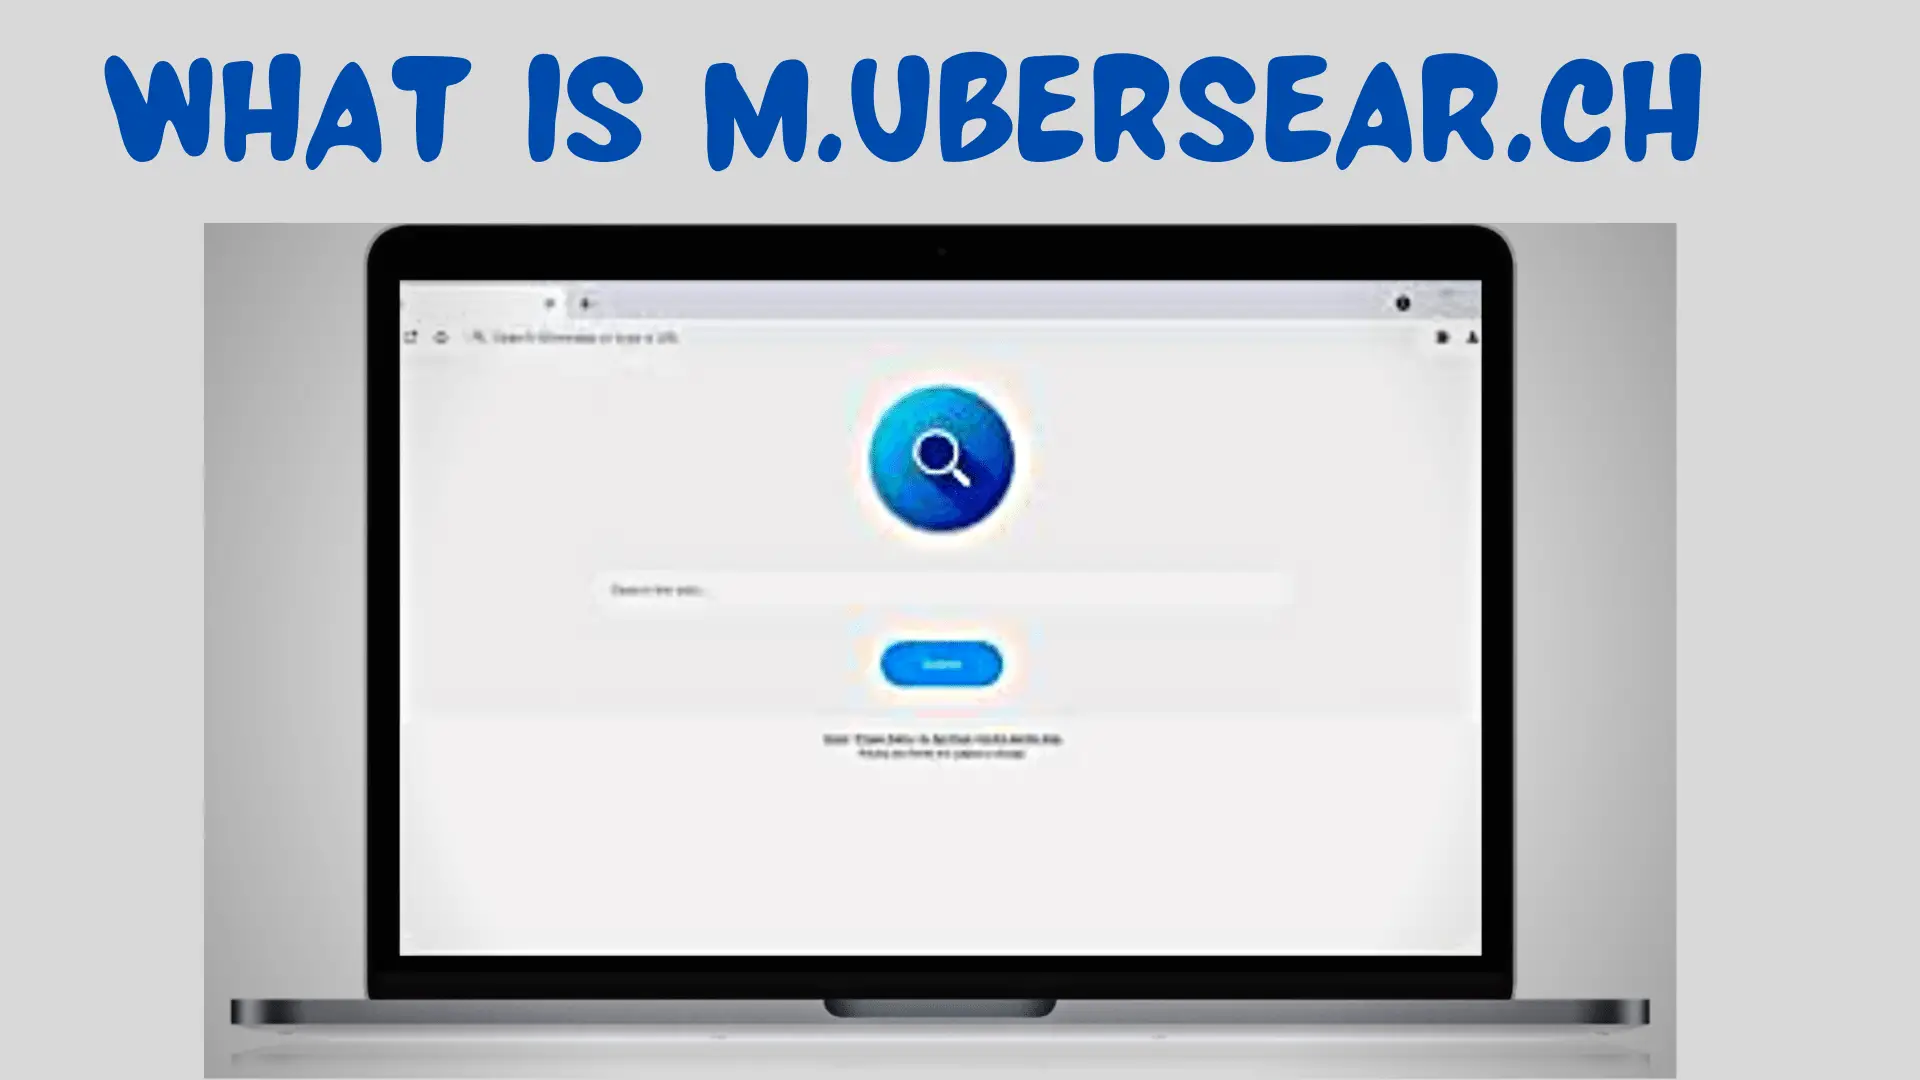 what is m.ubersear.ch